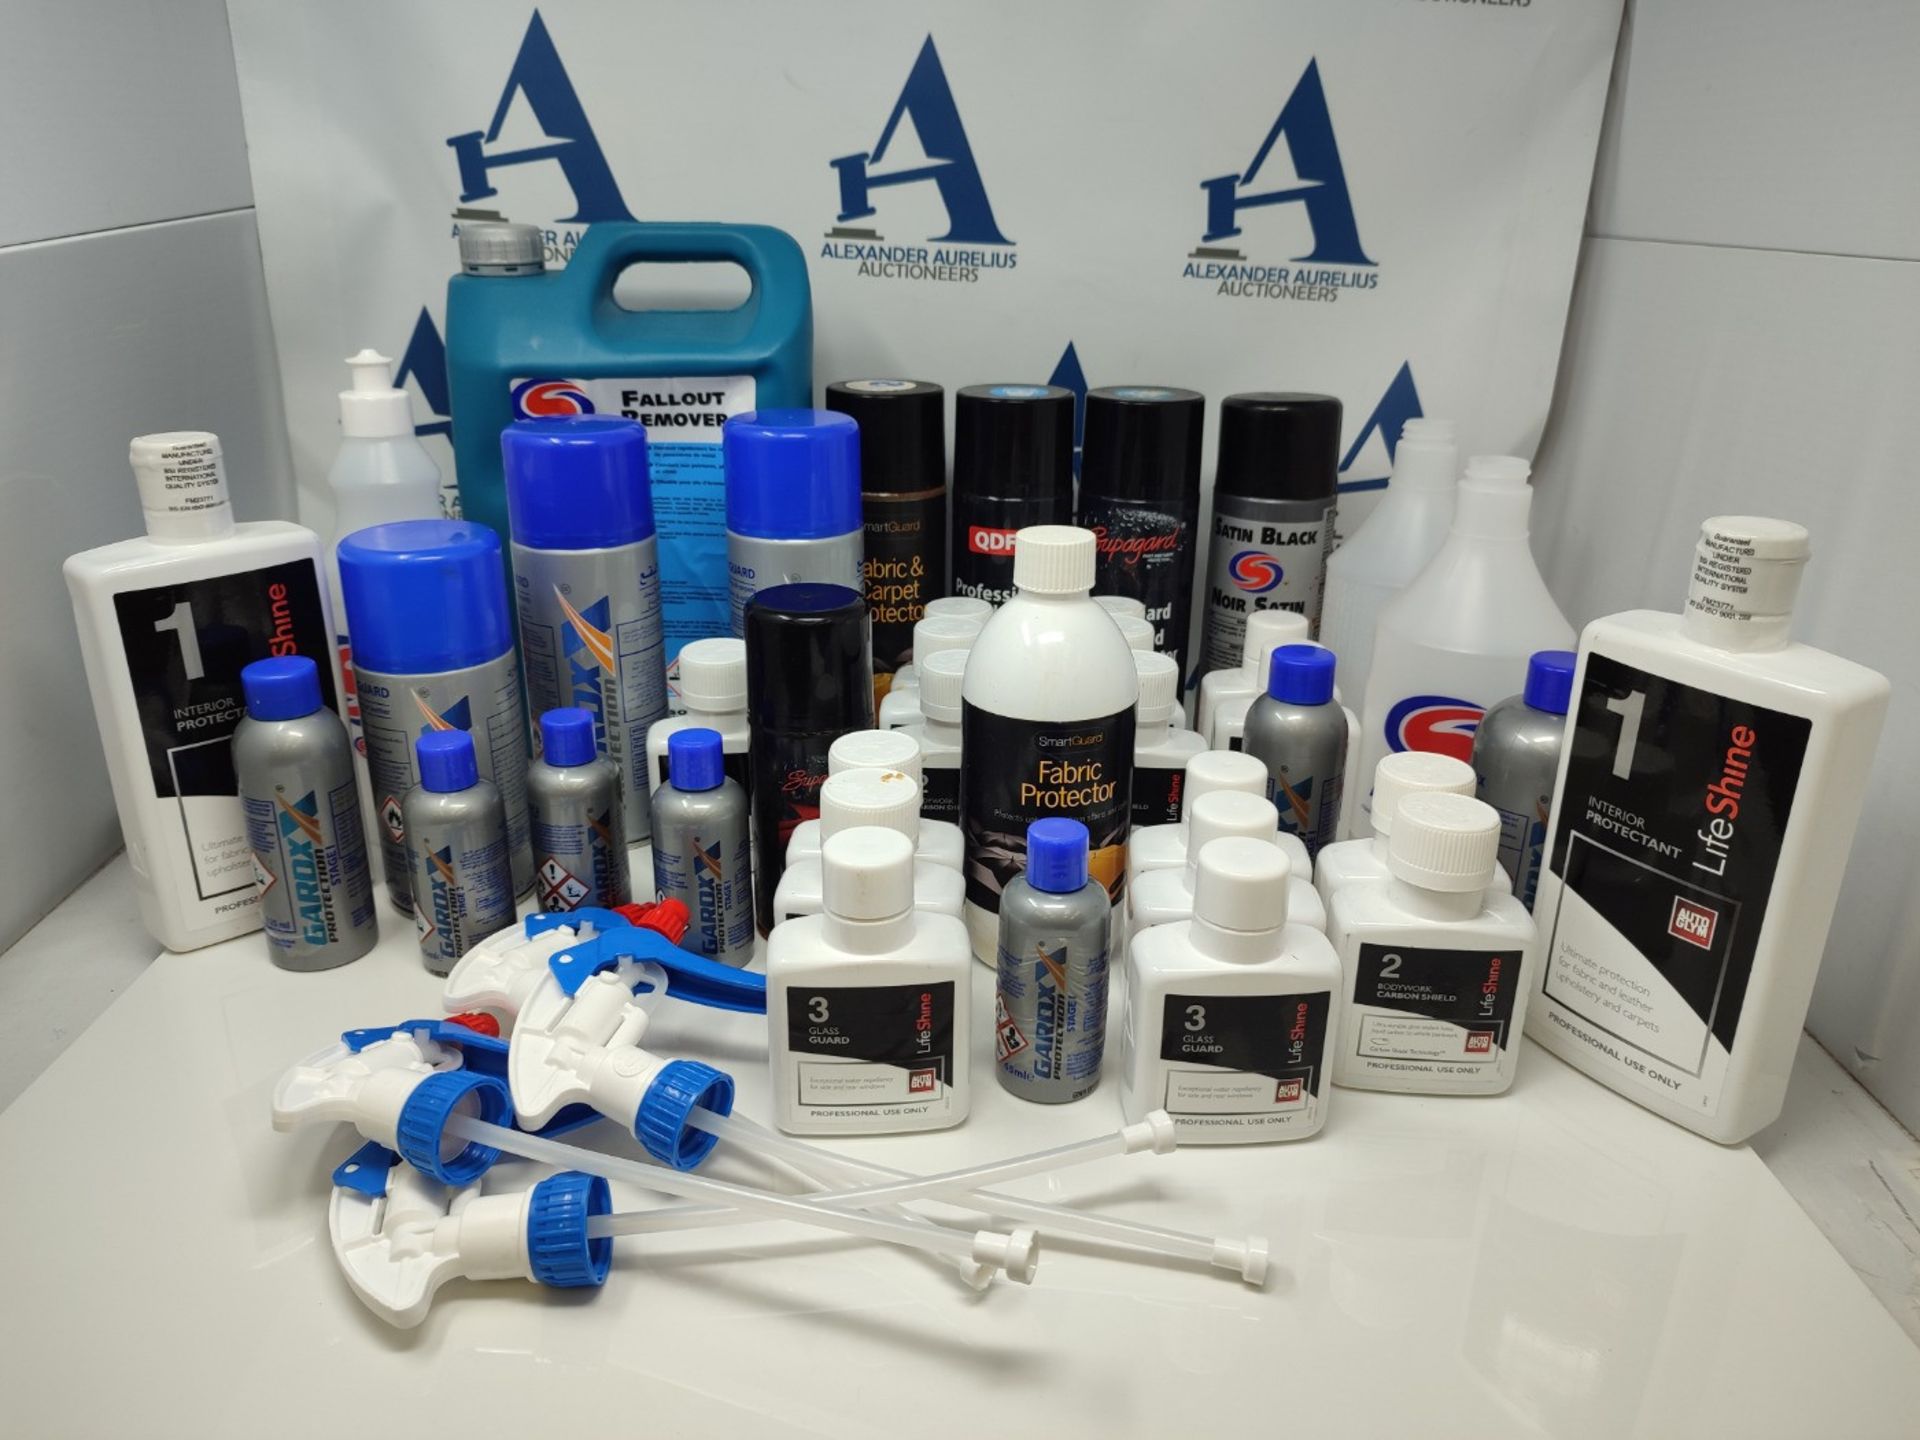 Products for professional car cleaning